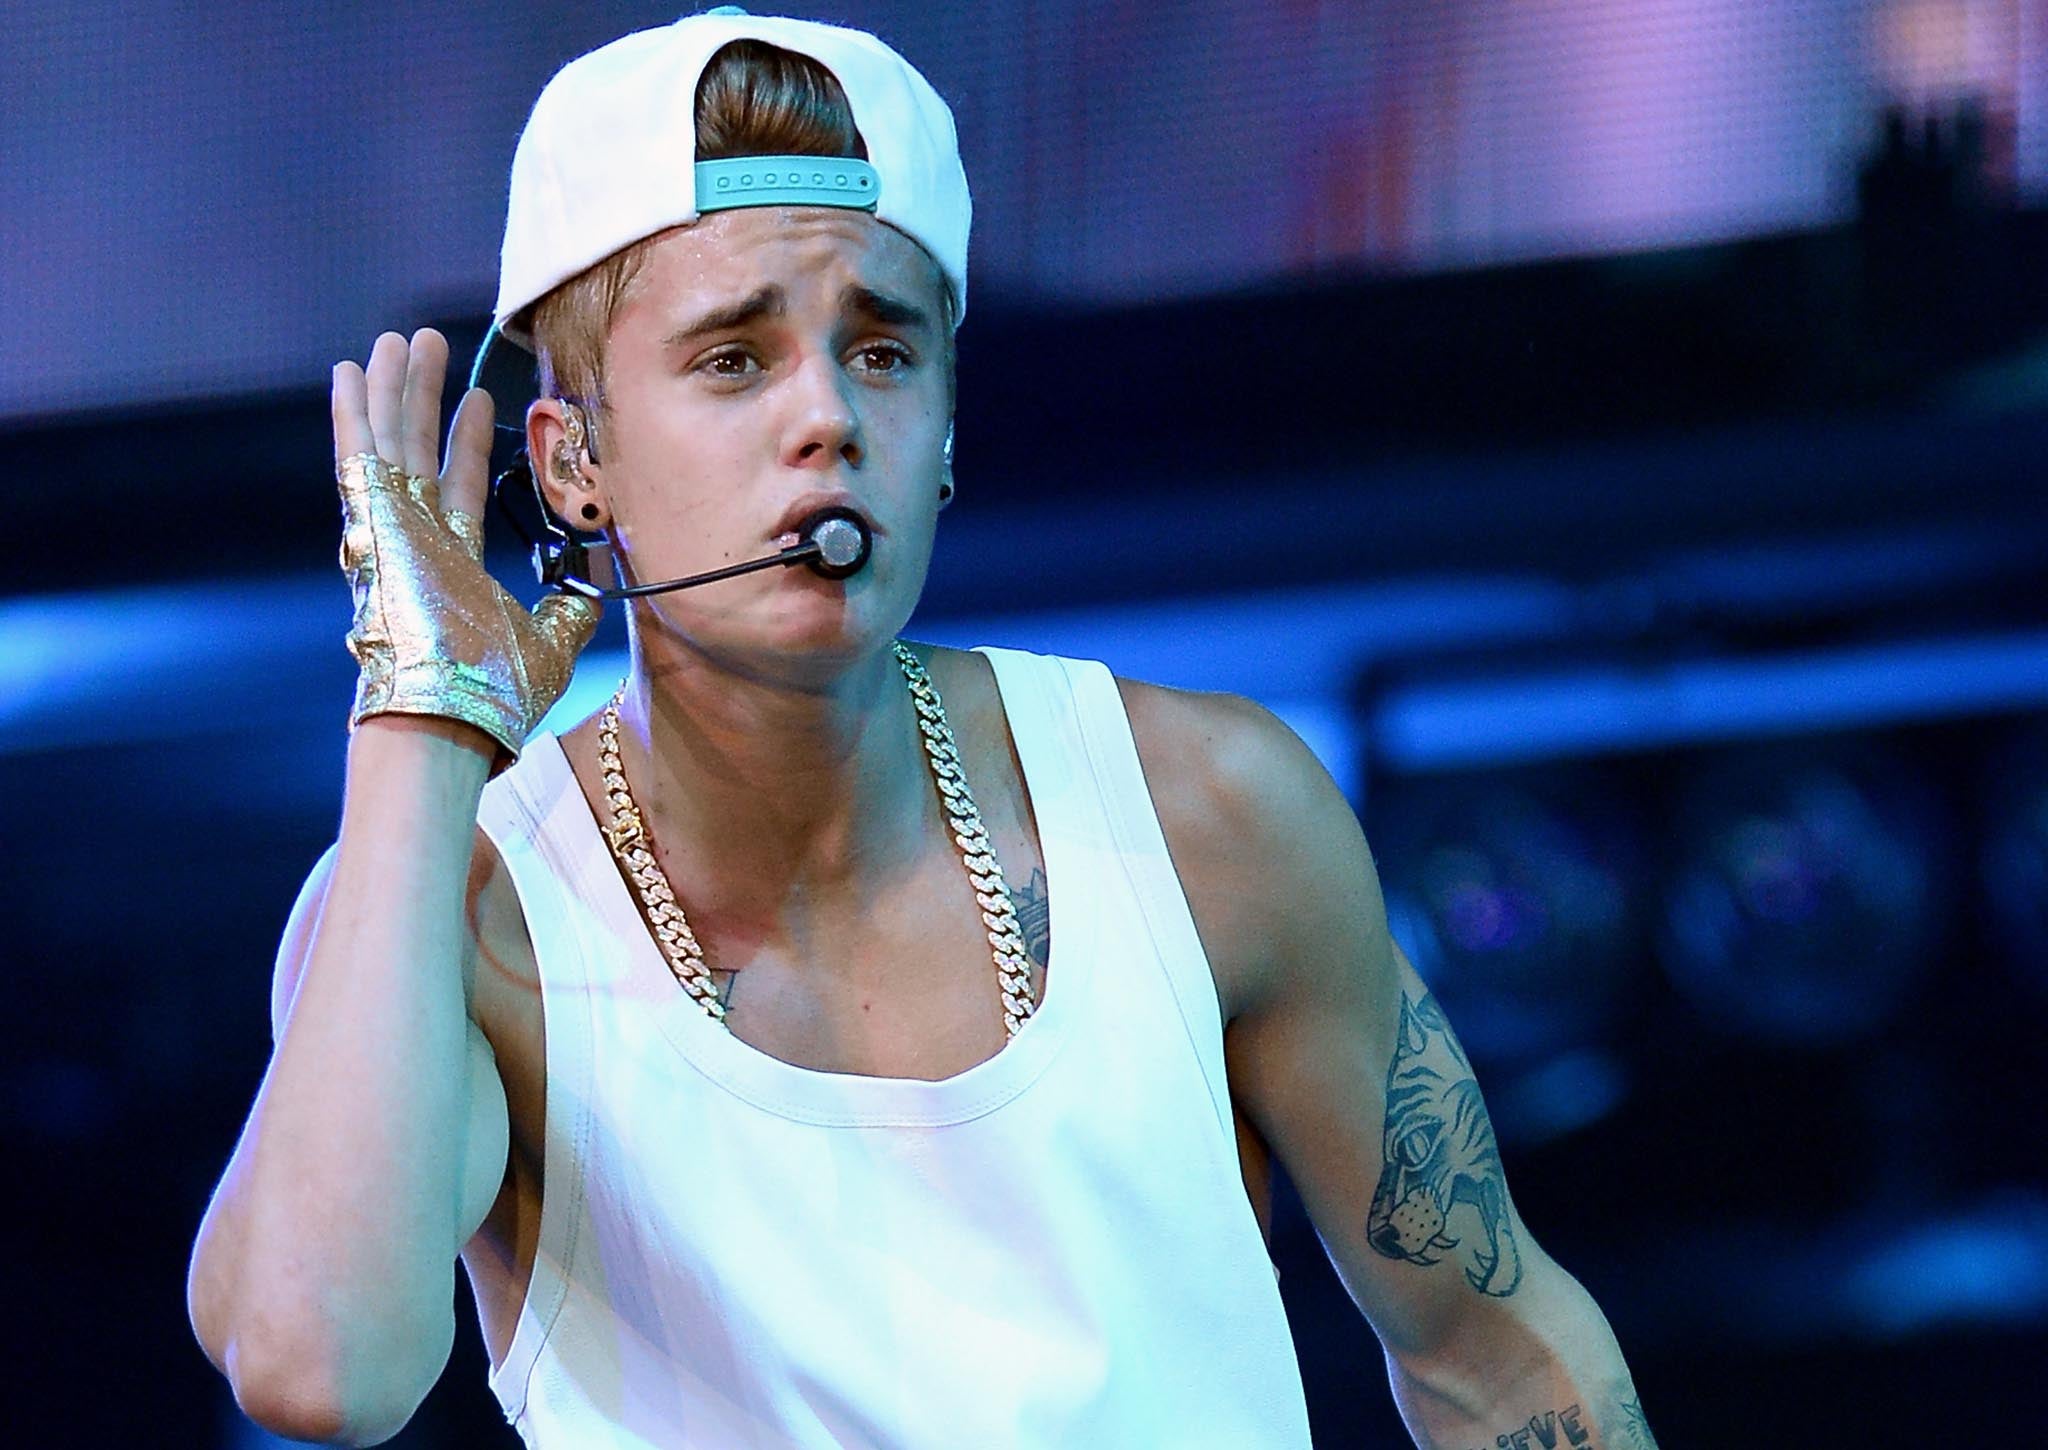 Is anybody out there? Justin Bieber's Believe is 14th at the US box office